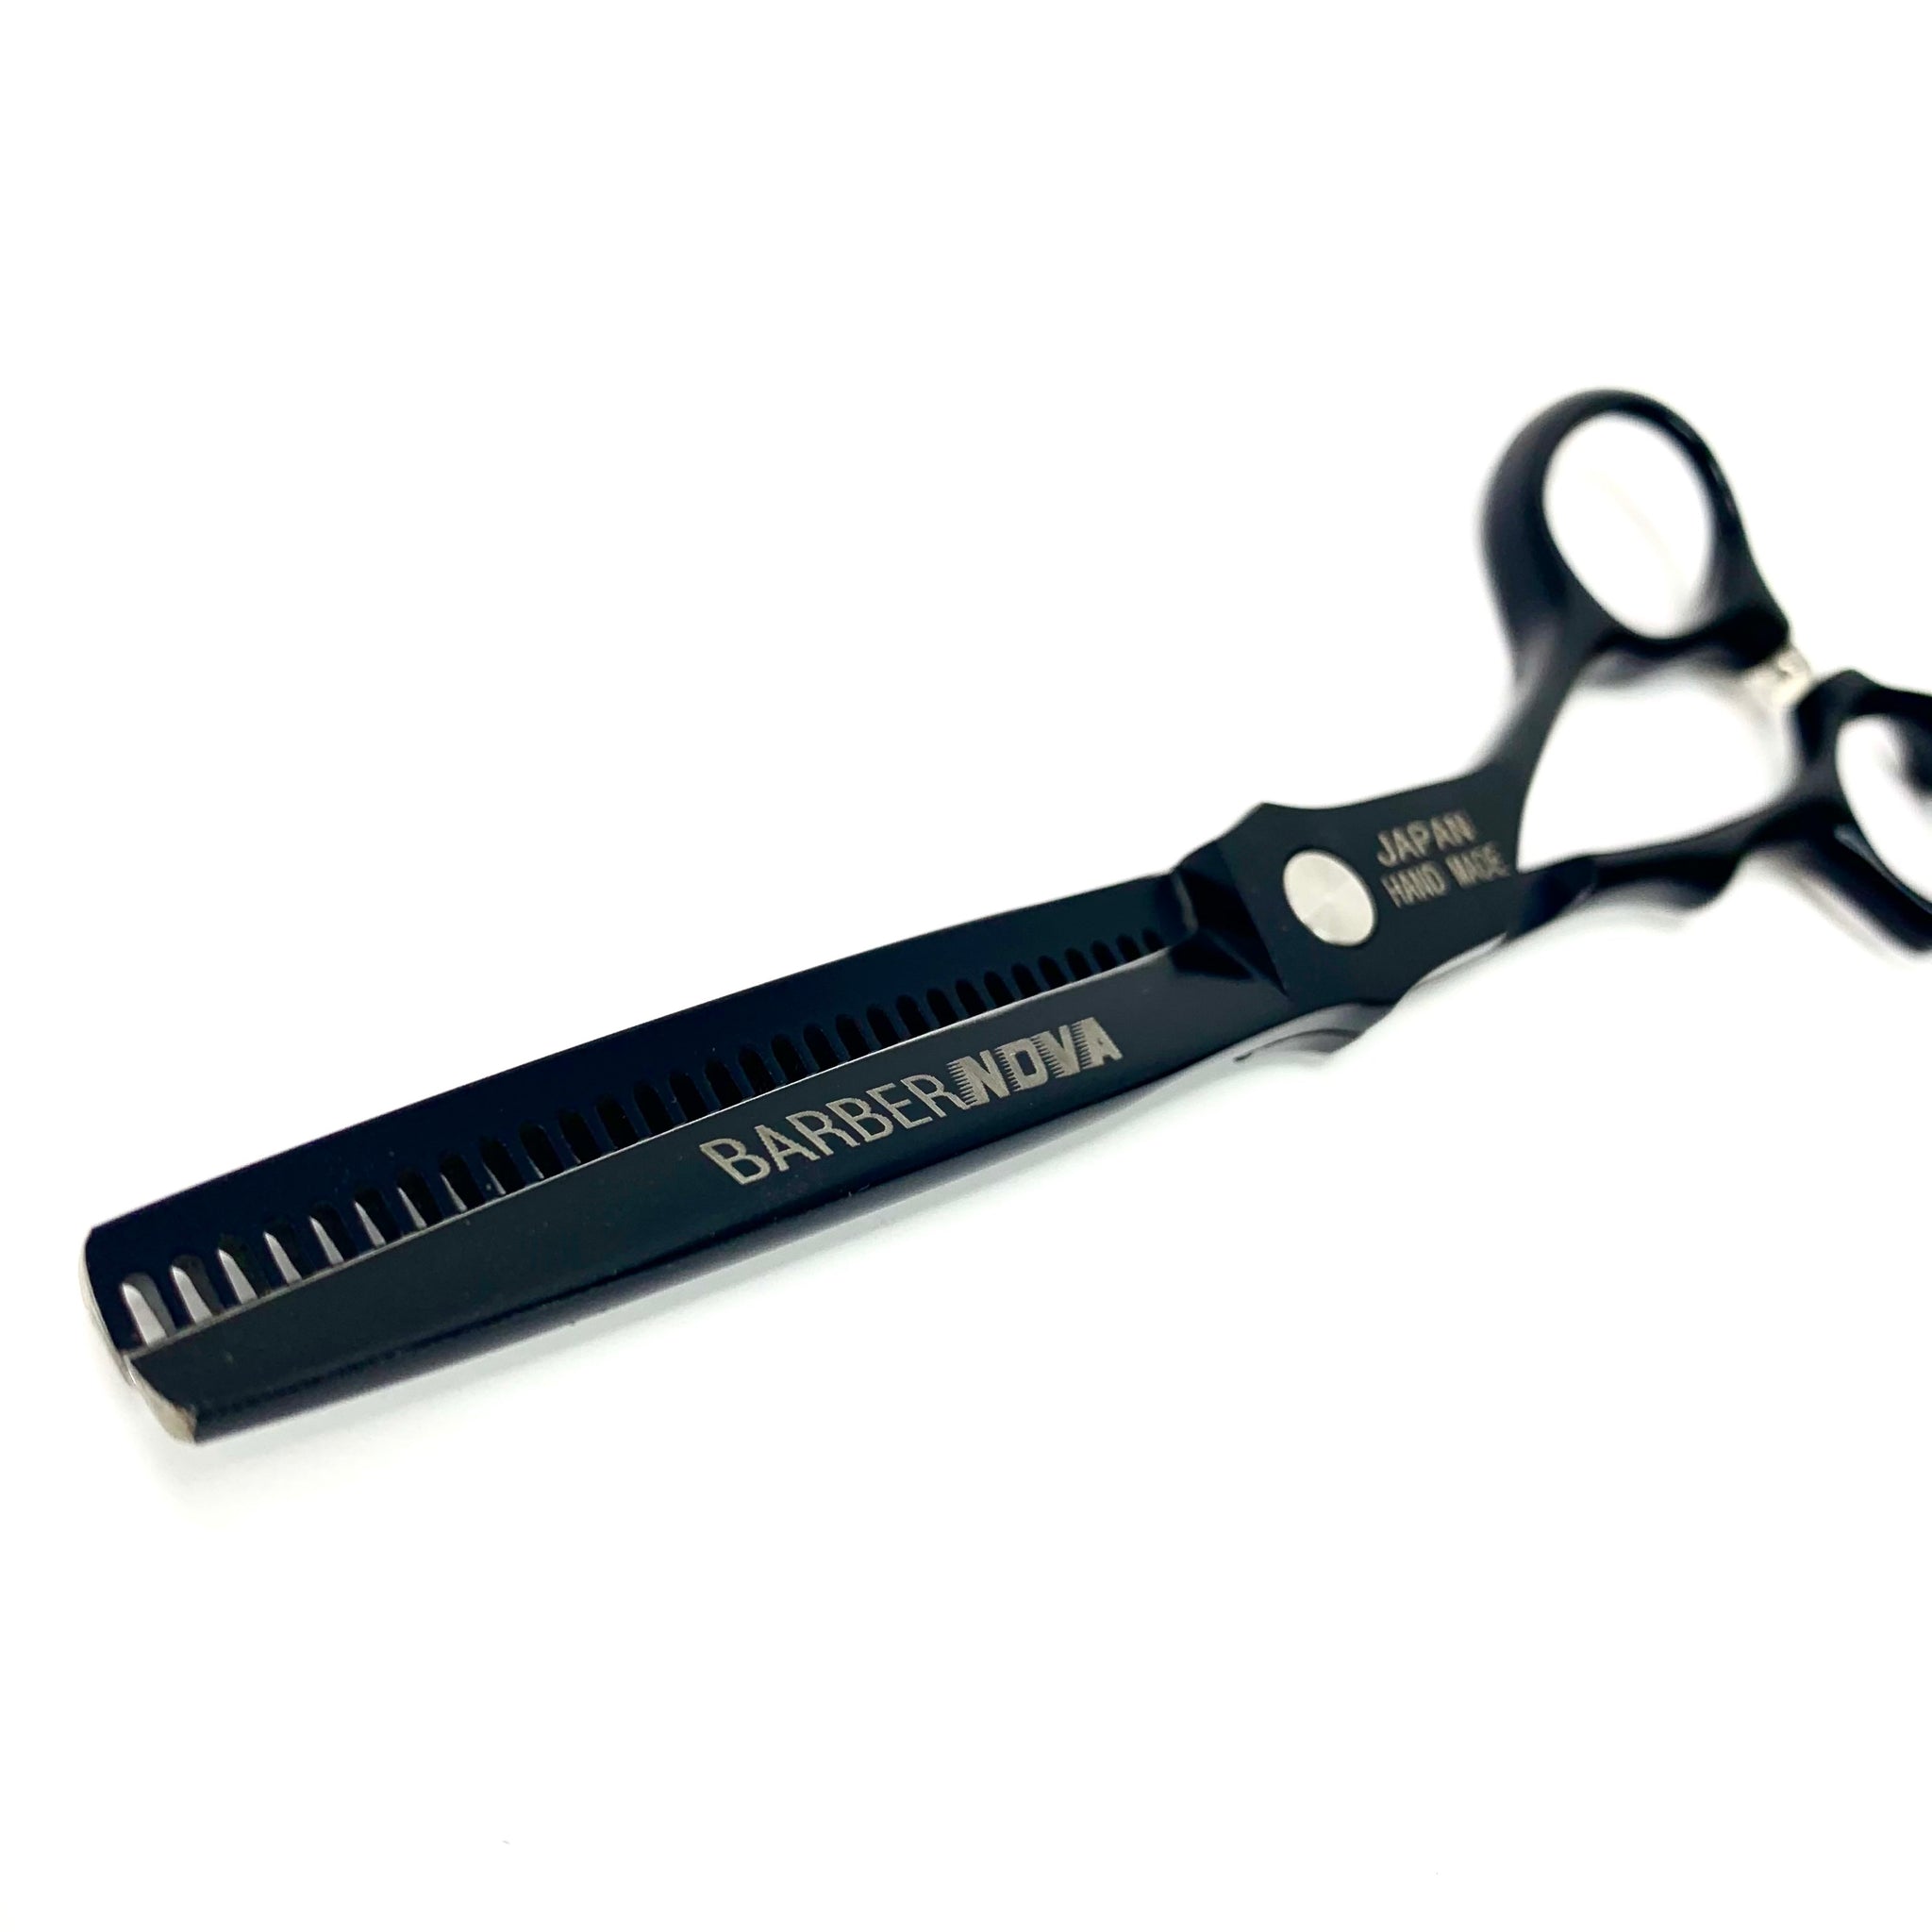 The Black Panther Nova Thinning Japanese 6 Inch Shear